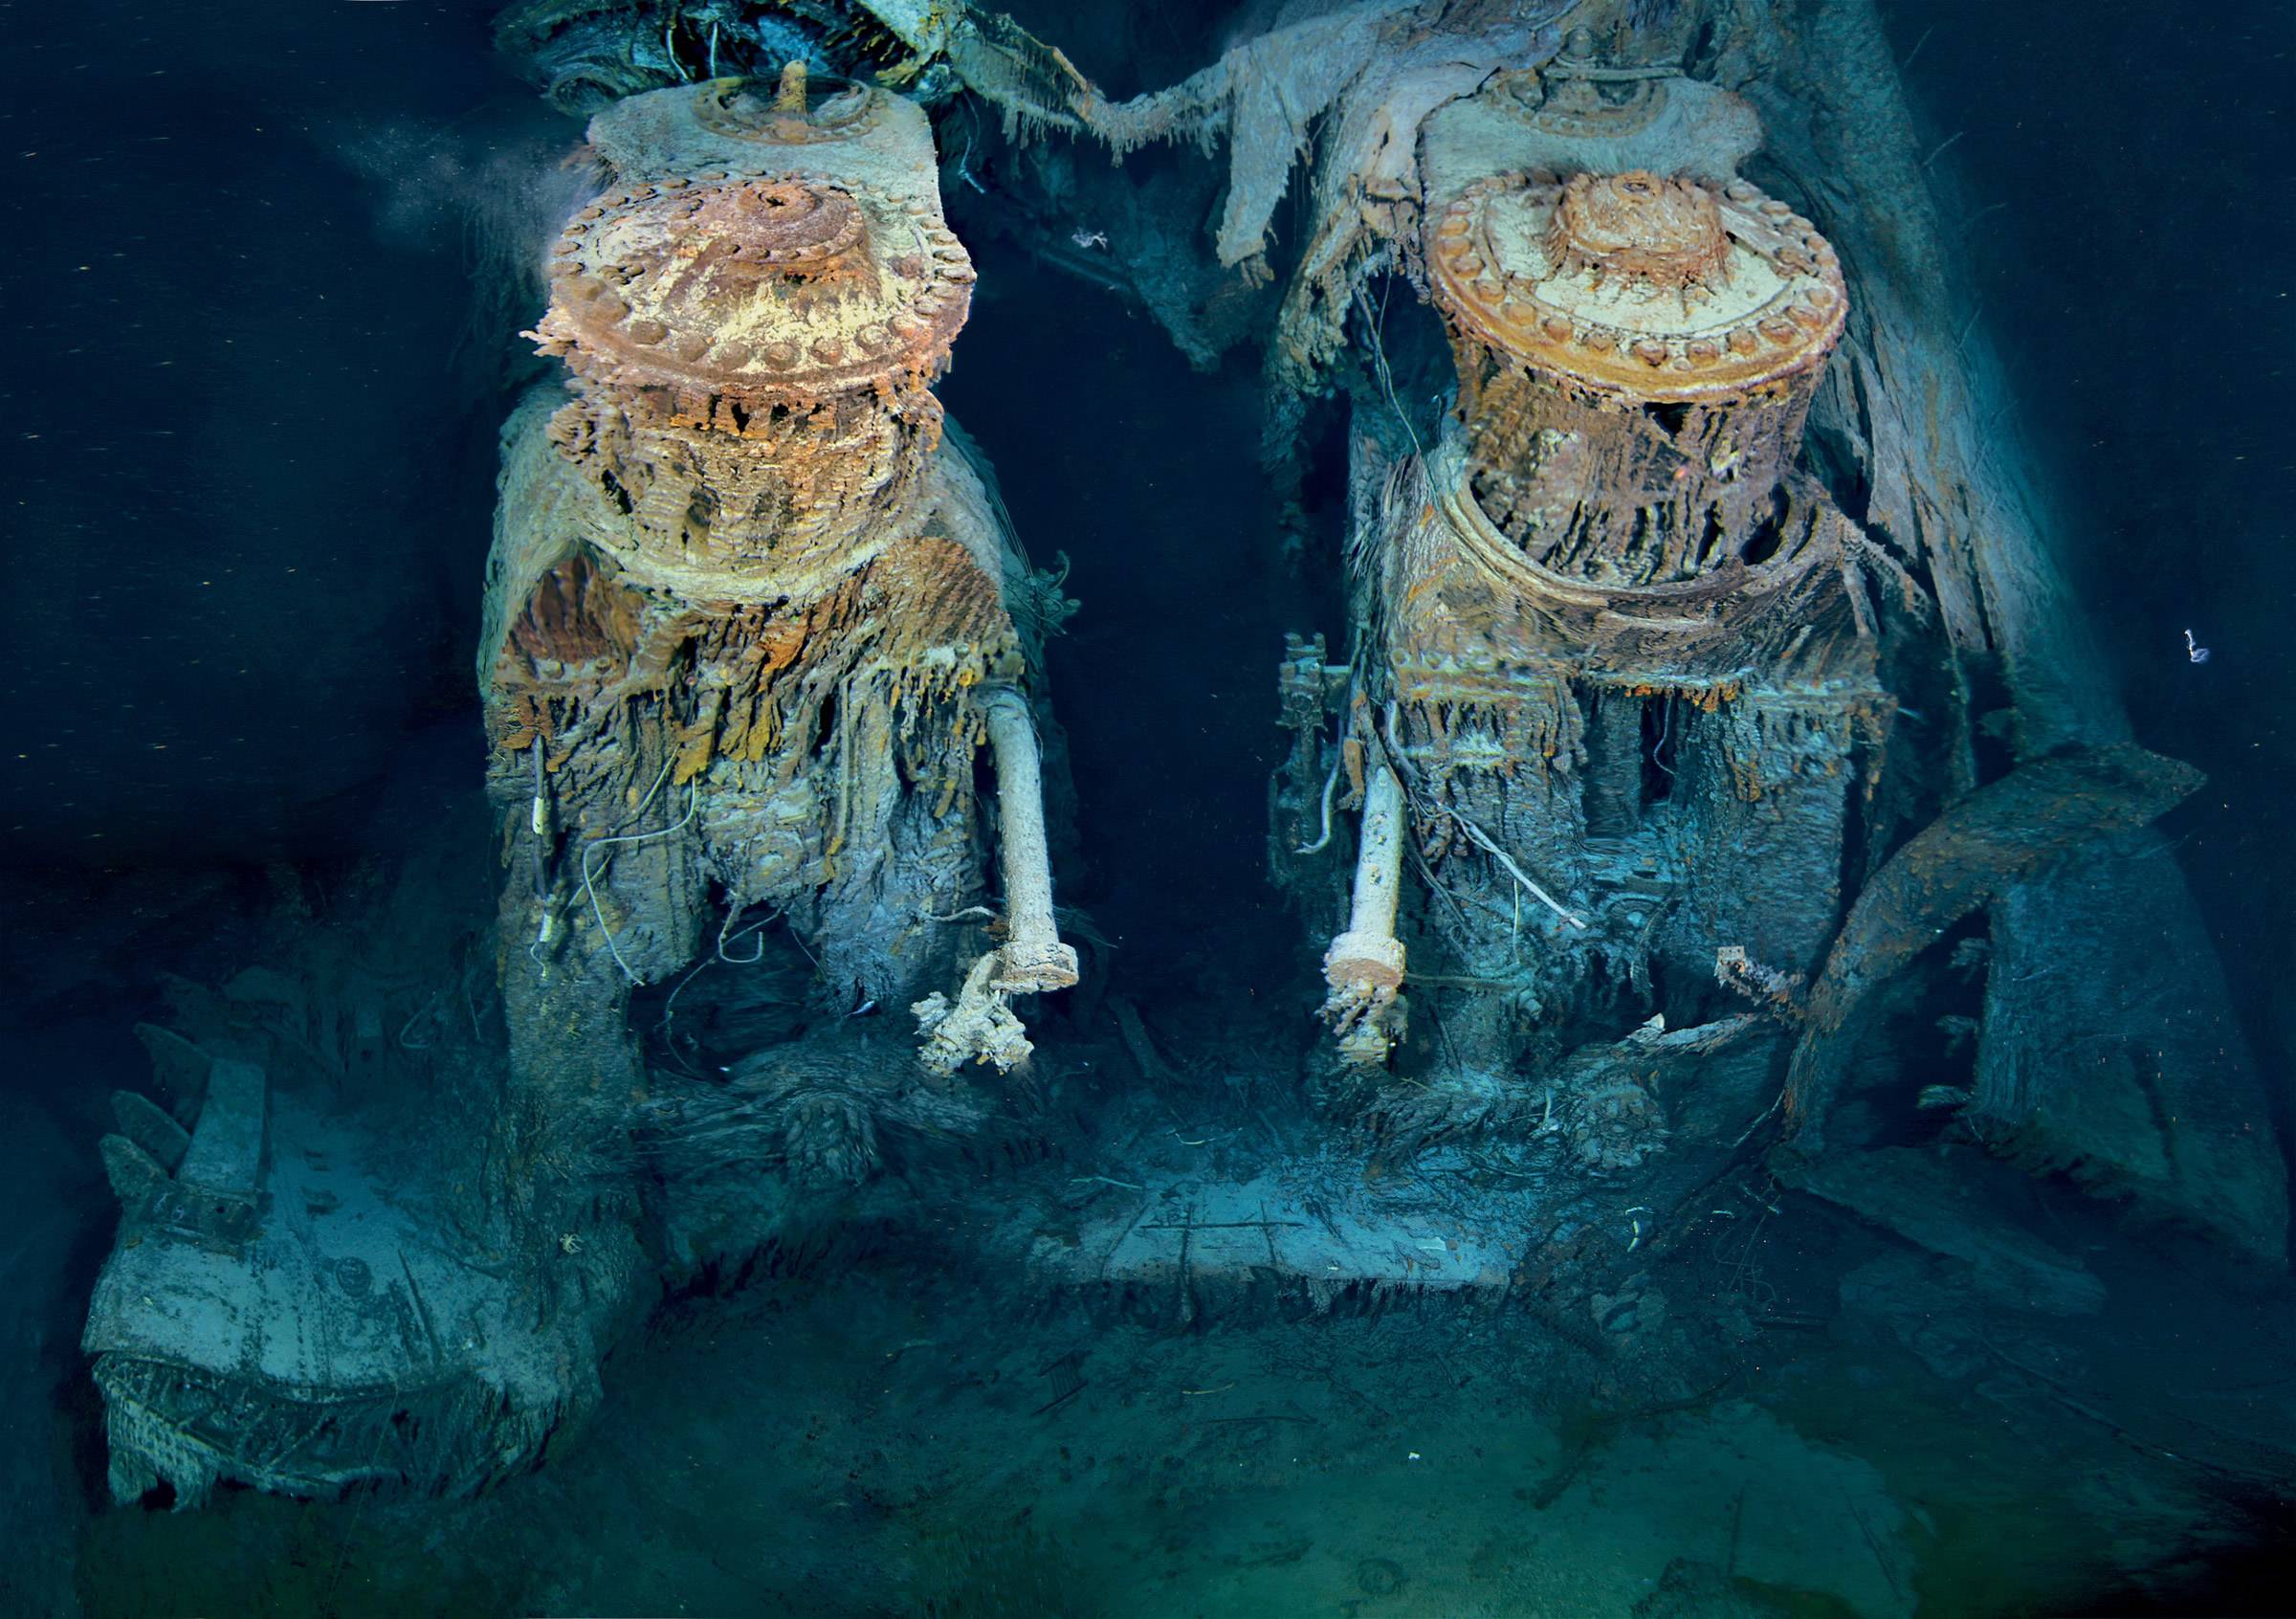 These are the engines from the RMS Titanic